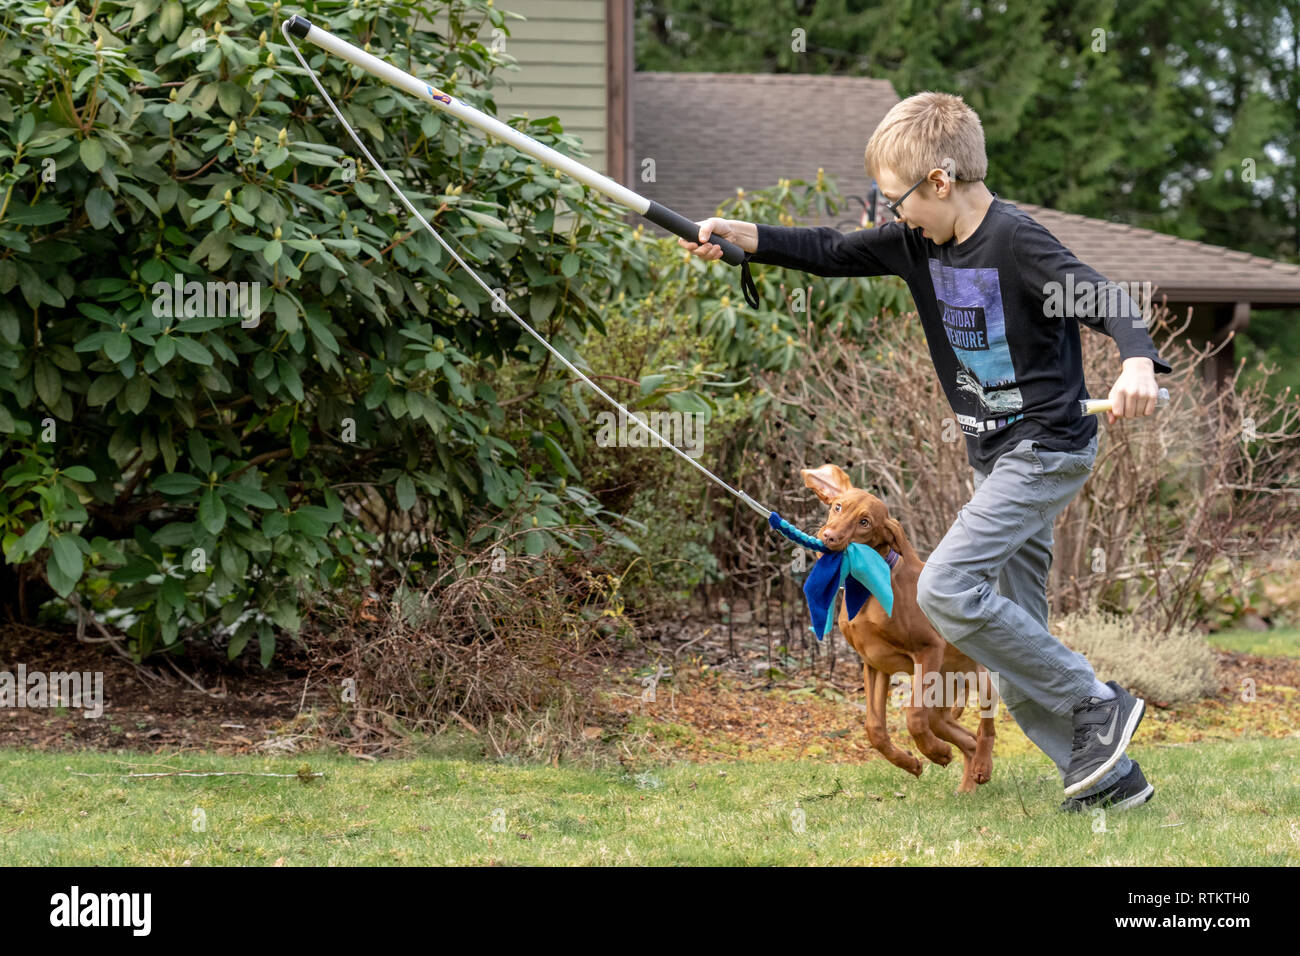 Issaquah, Washington, USA.  Six year old boy running with his five month old Vizsla puppy 'Pepper' who is chasing after a toy on a stick, which is sup Stock Photo